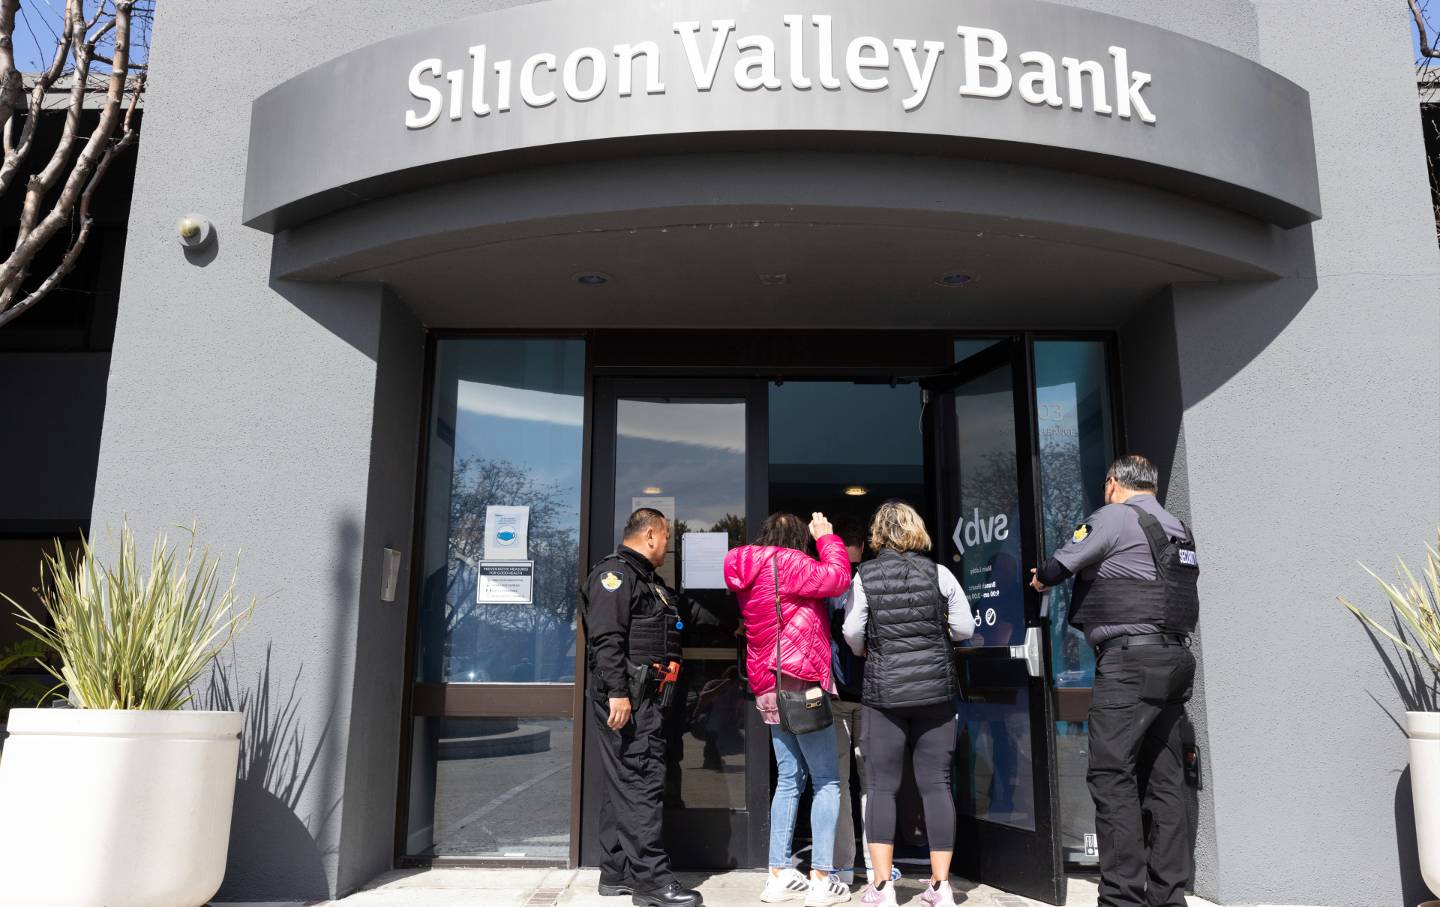 People outside Silicon Valley Bank with security guards allowing them in.